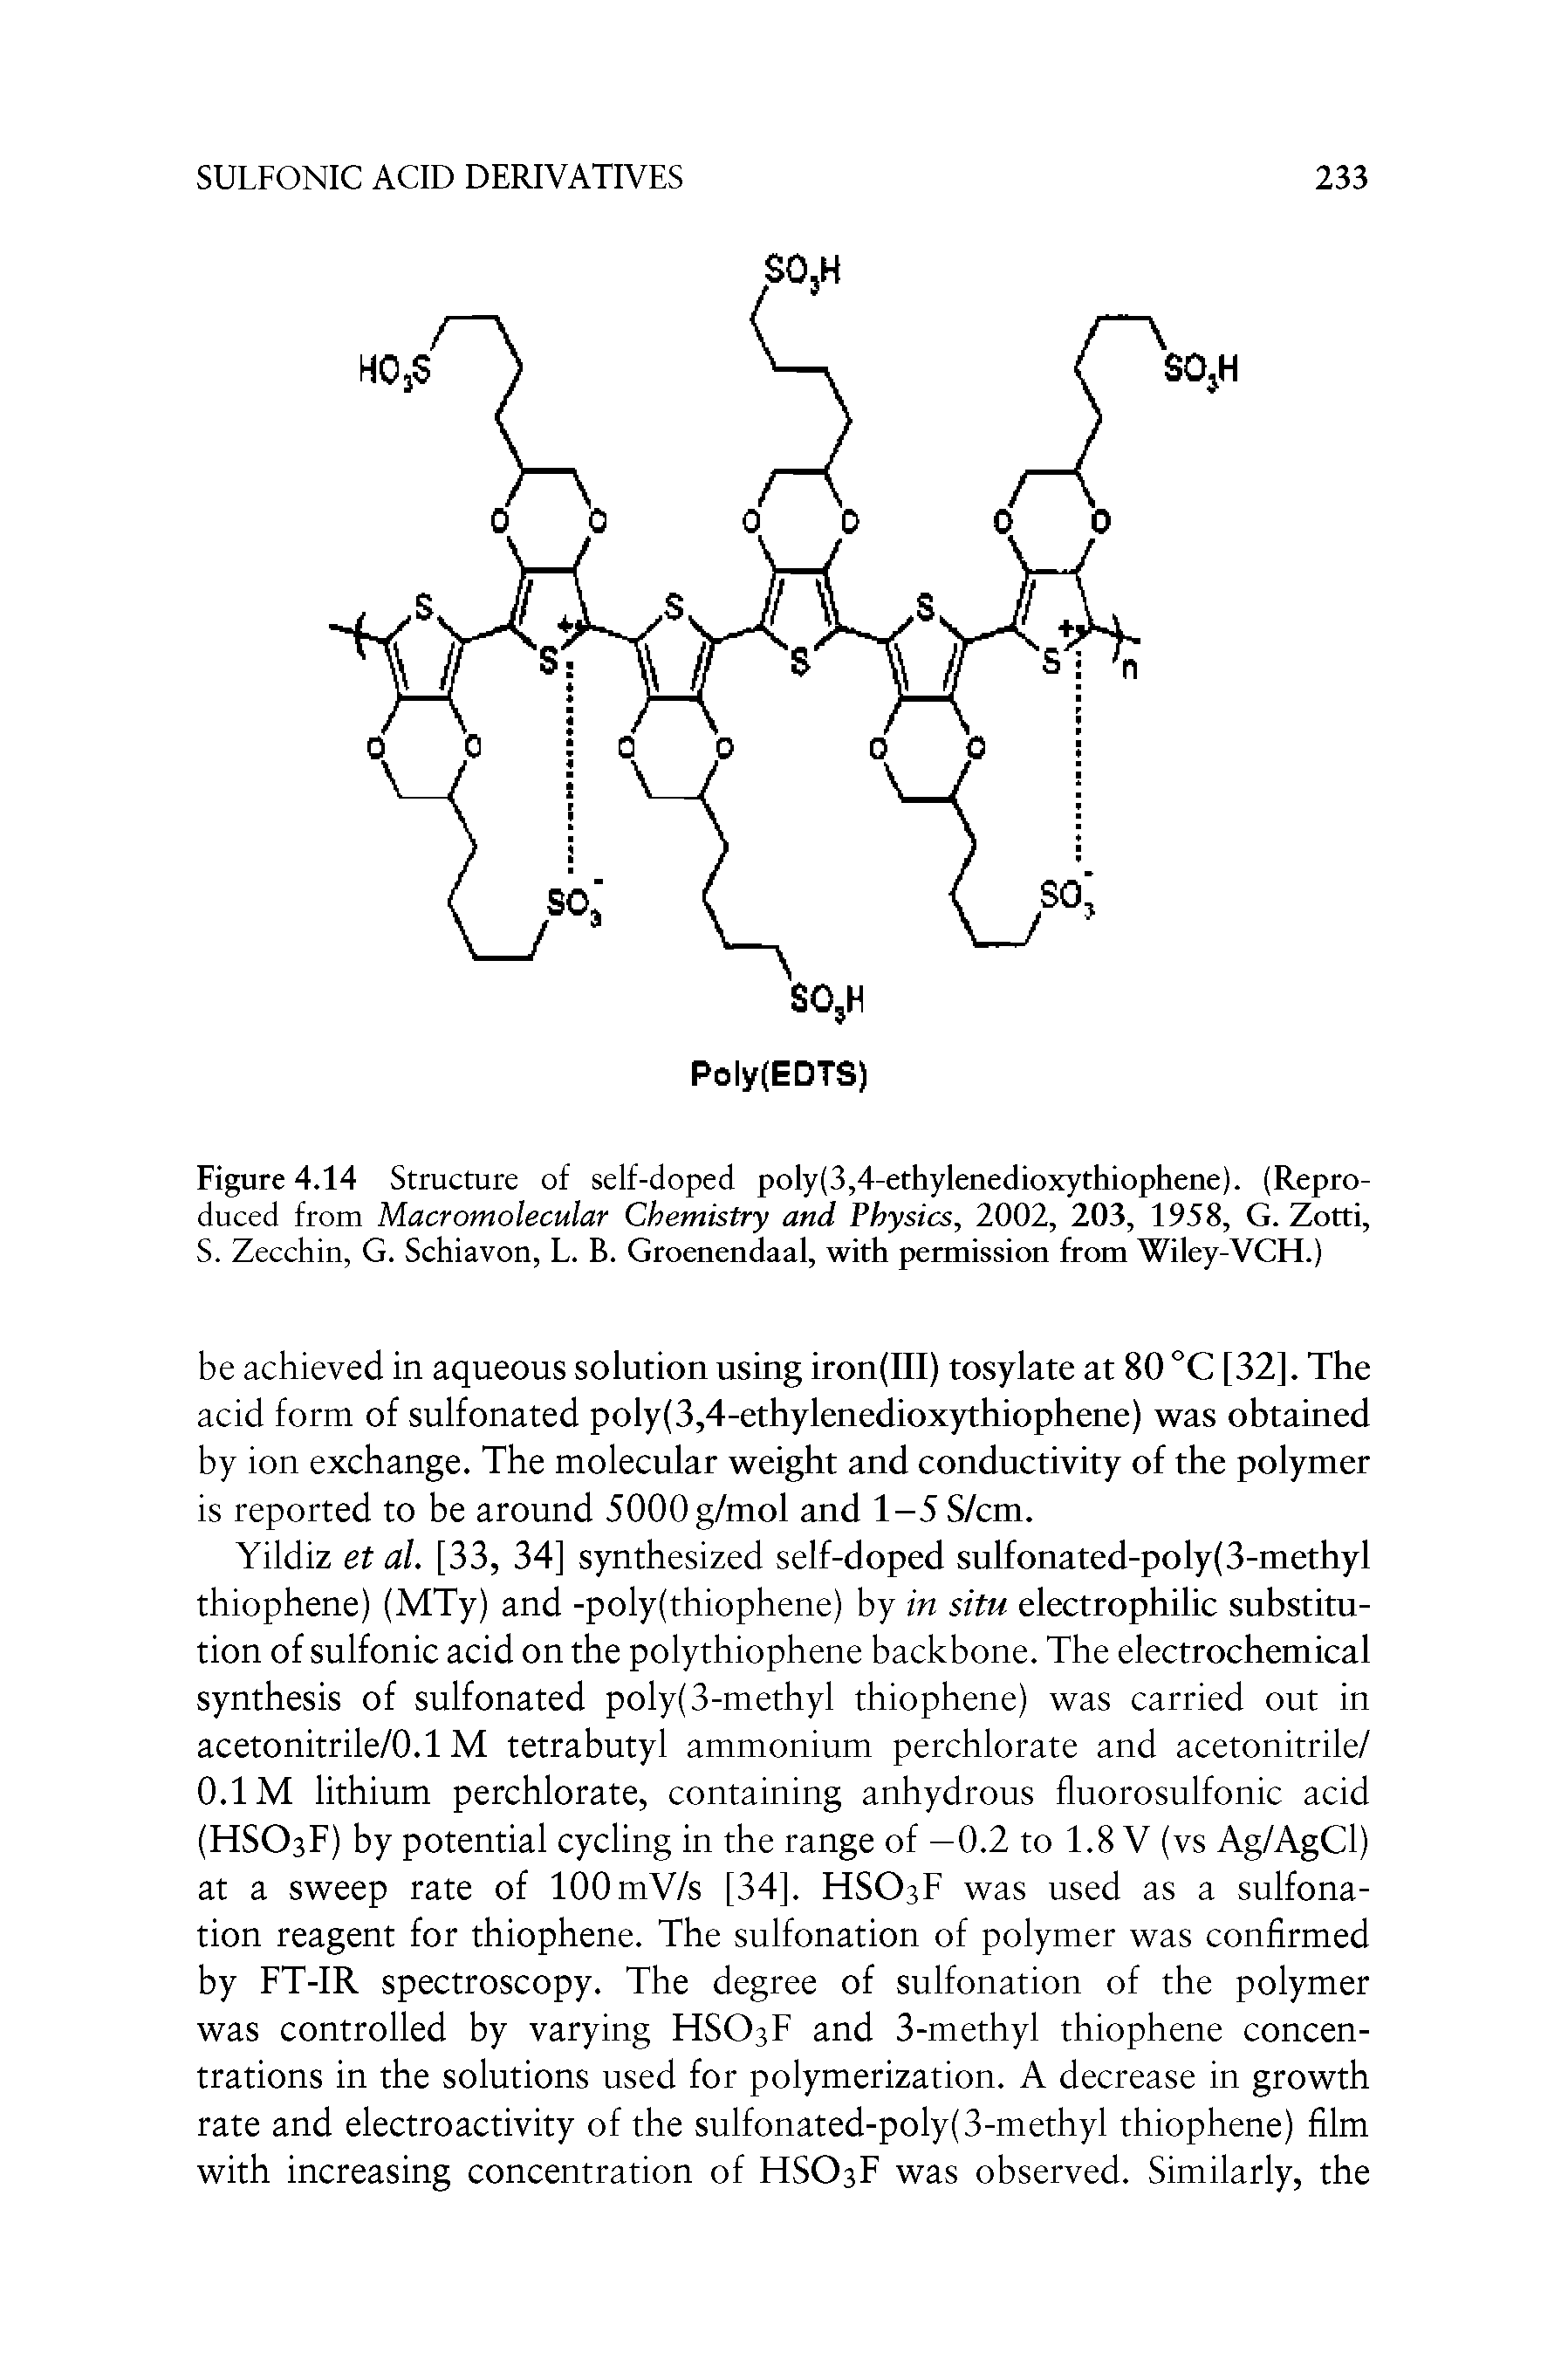 Figure 4.14 Structure of self-doped poly(3,4-ethylenedioxythiophene). (Reproduced from Macromolecular Chemistry and Physics, 2002, 203, 1958, G. Zotti, S. Zecchin, G. Schiavon, L. B. Groenendaal, with permission from Wiley-VCH.)...